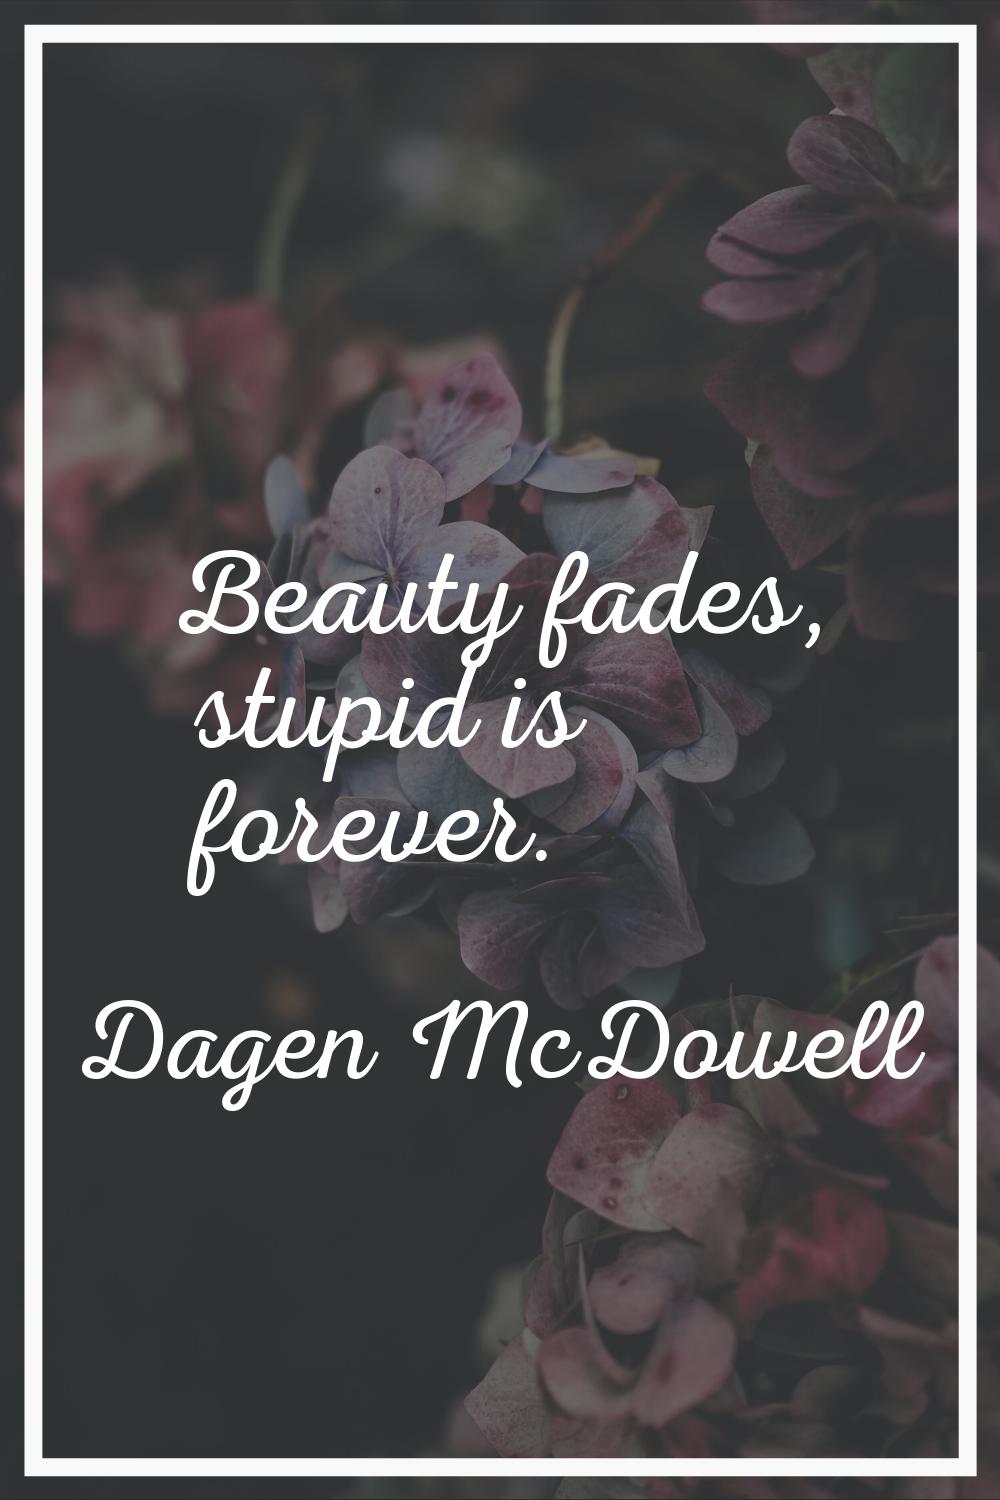 Beauty fades, stupid is forever.